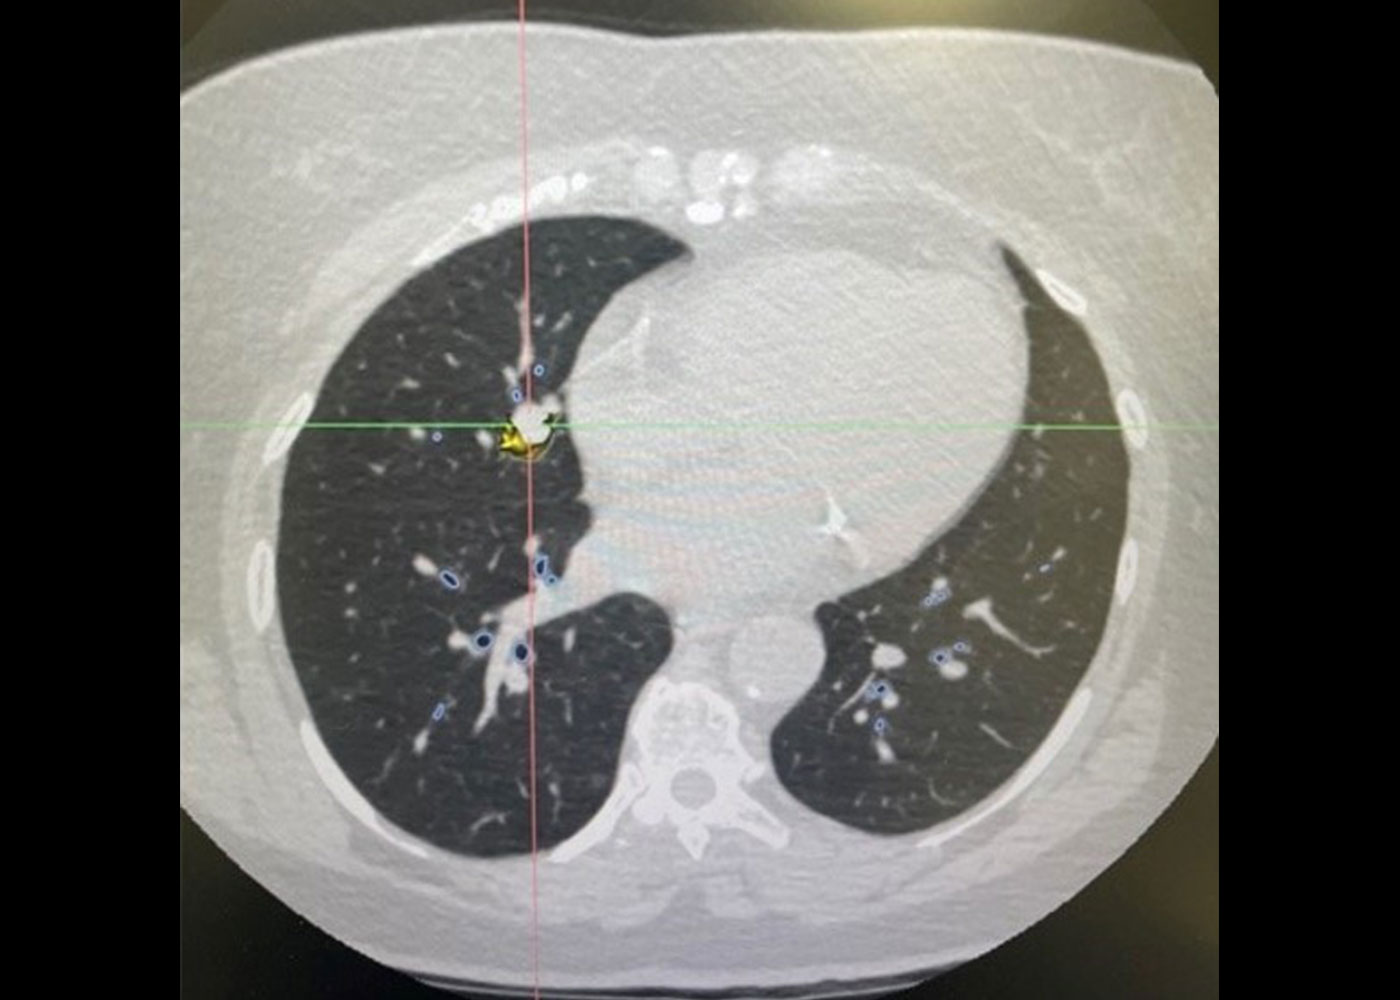 Fig 1. MONARCH® planning software interface showing small lung nodule